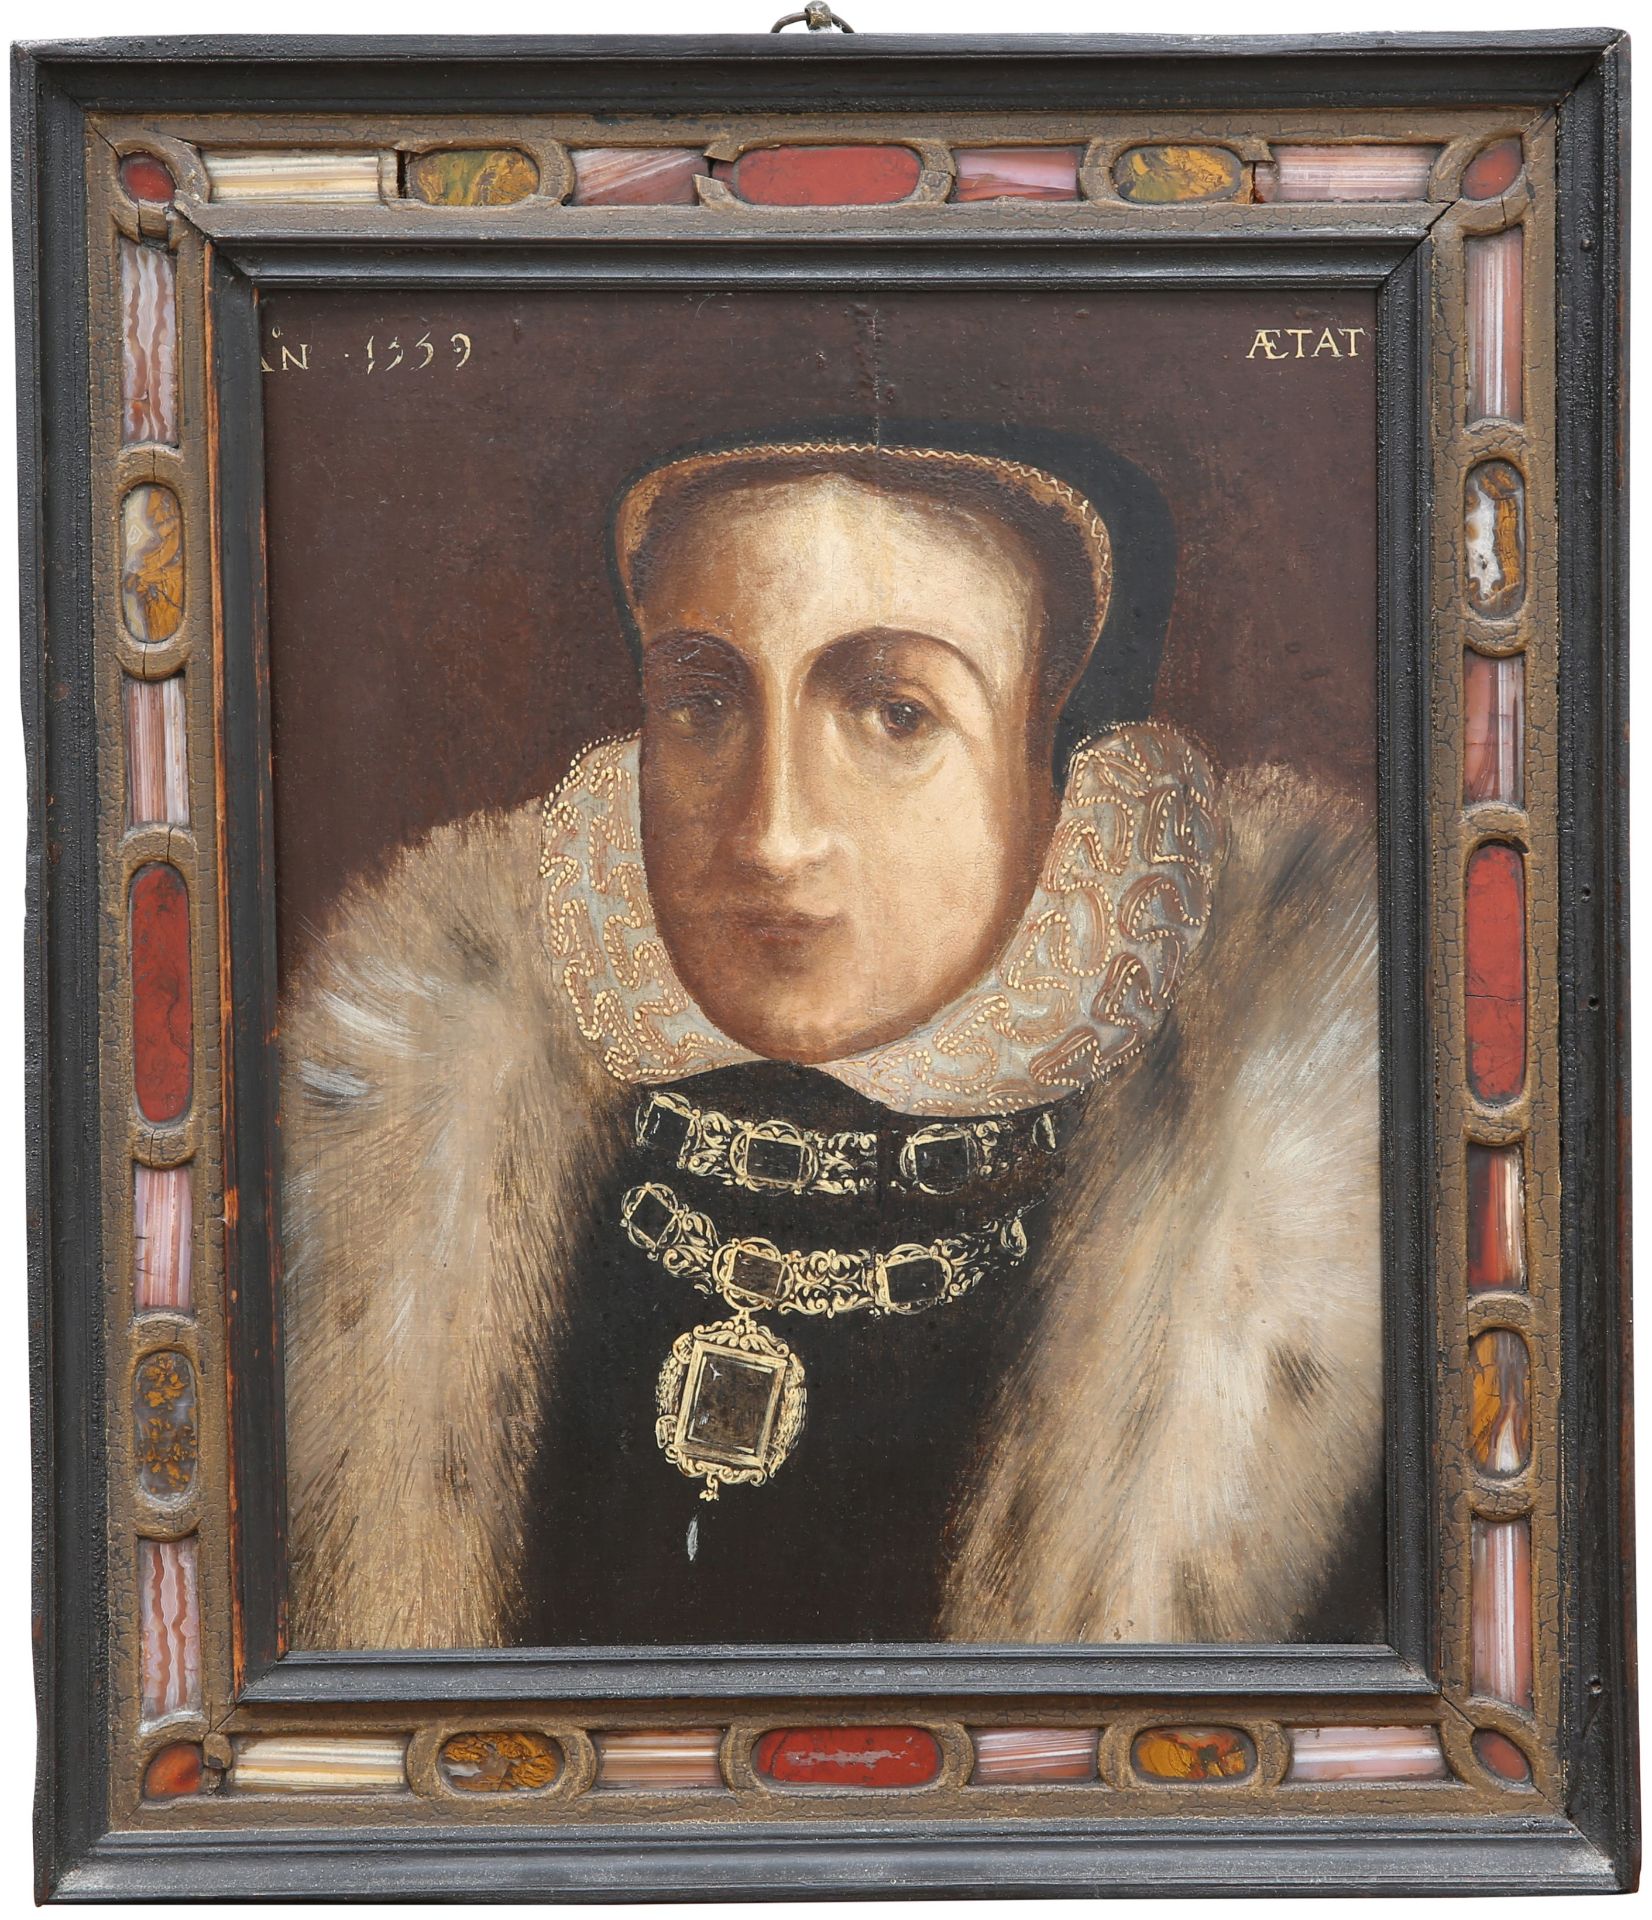 BRITISH SCHOOL, PORTRAIT OF A LADY (POSSIBLY MARY QUEEN OF SCOTS)